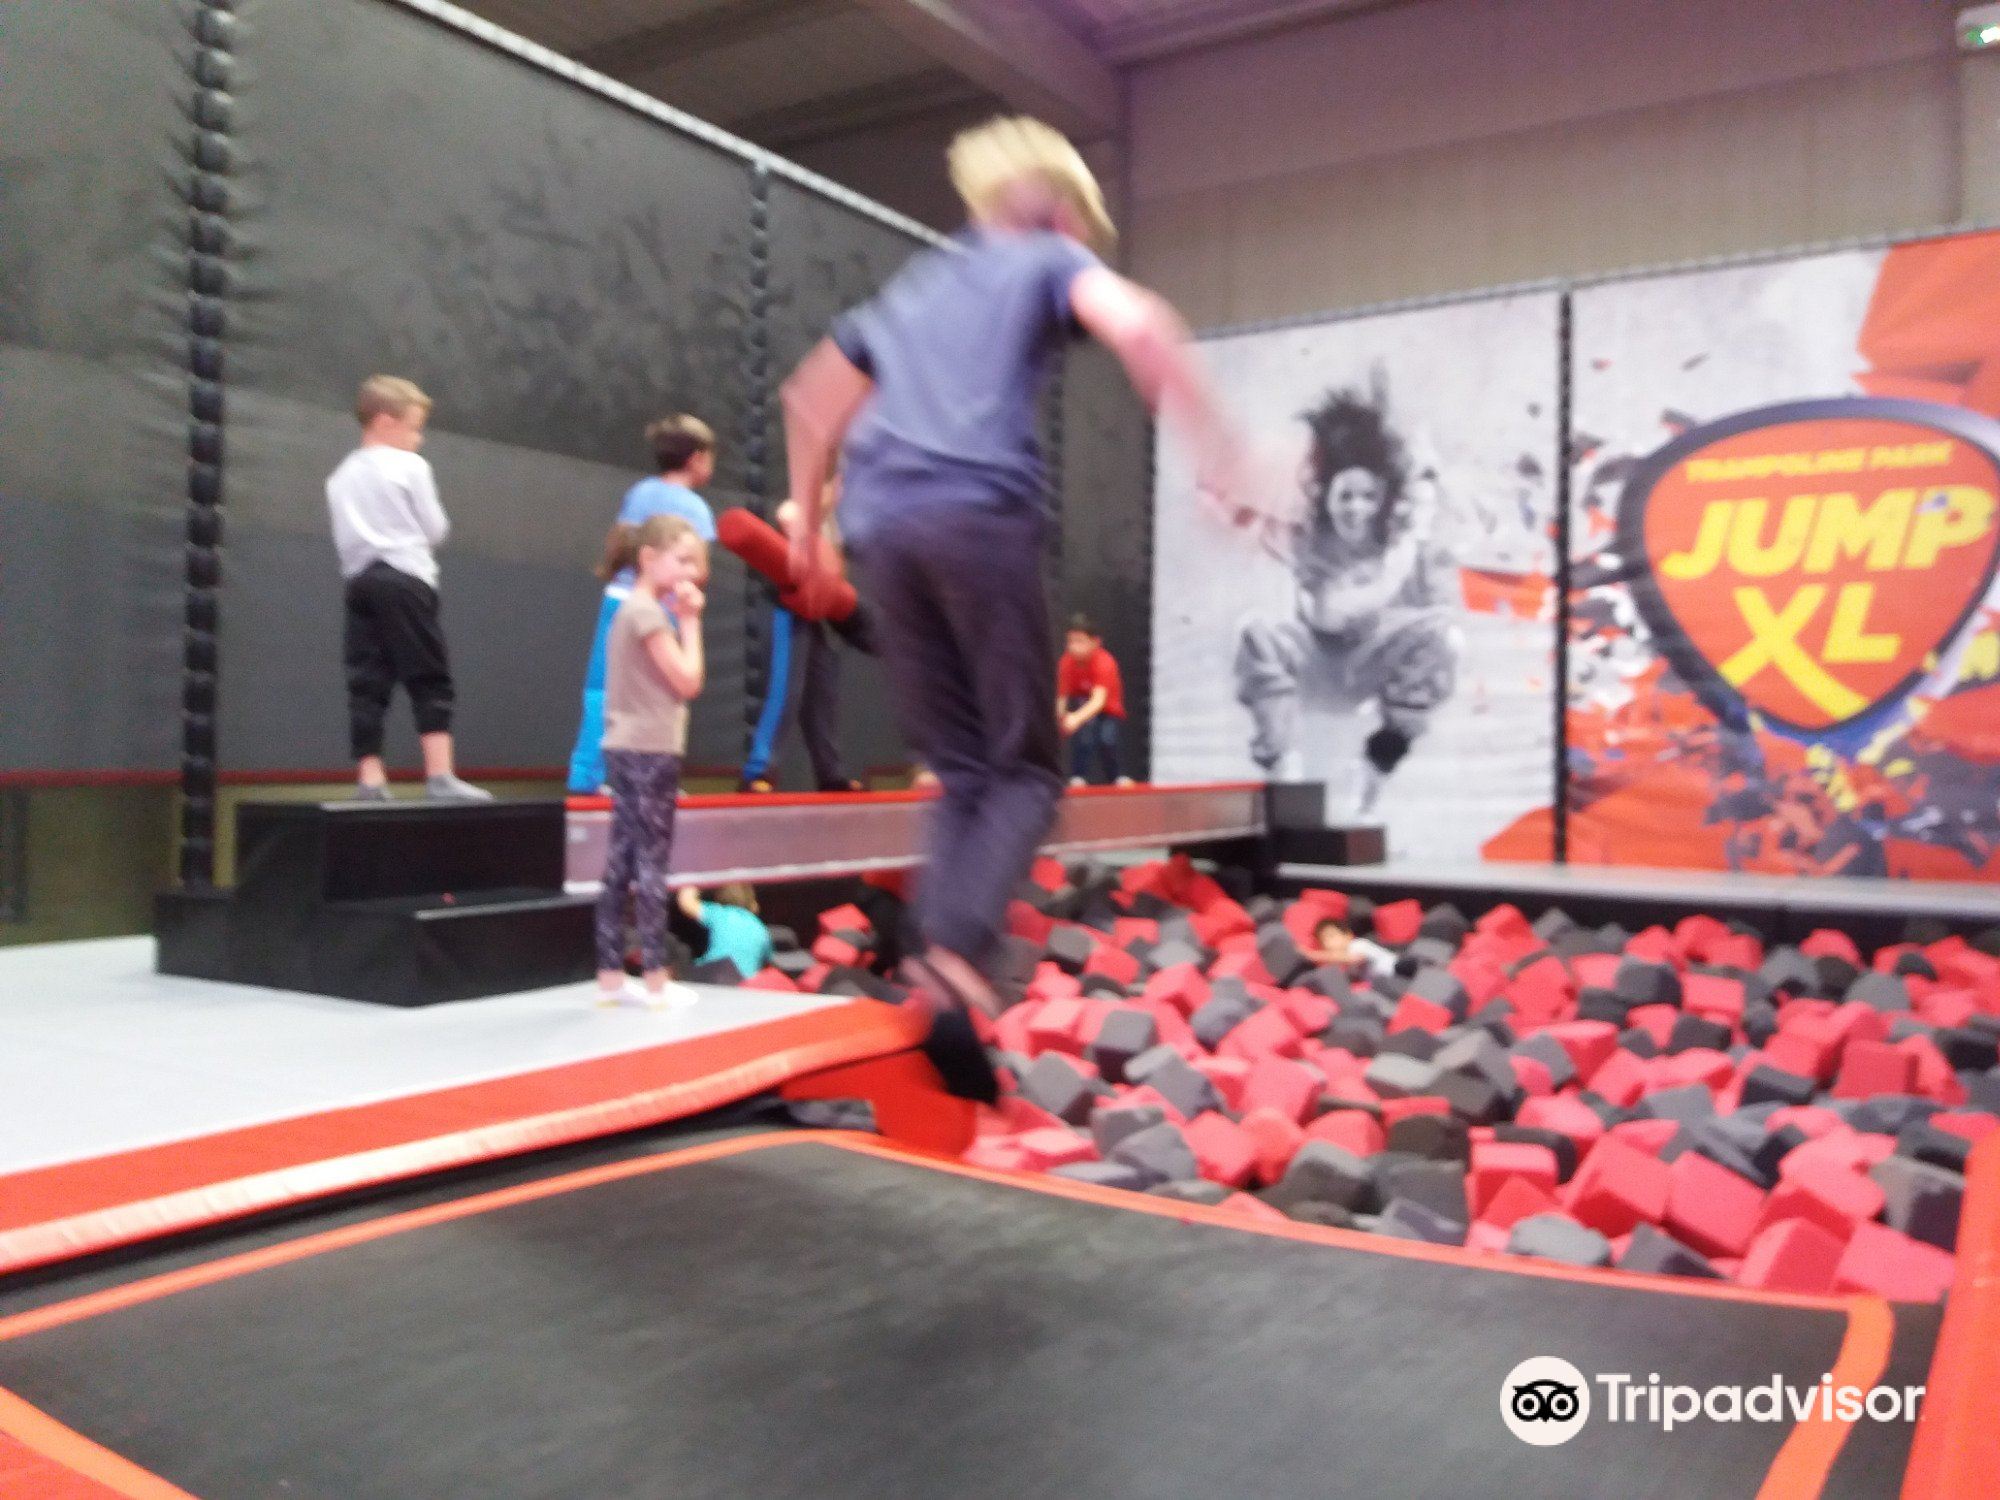 Latest travel itineraries XL Trampoline Park Lille in August (updated in 2023), JUMP Trampoline Park Lille reviews, JUMP XL Trampoline Park Lille address and opening hours, popular attractions, hotels,